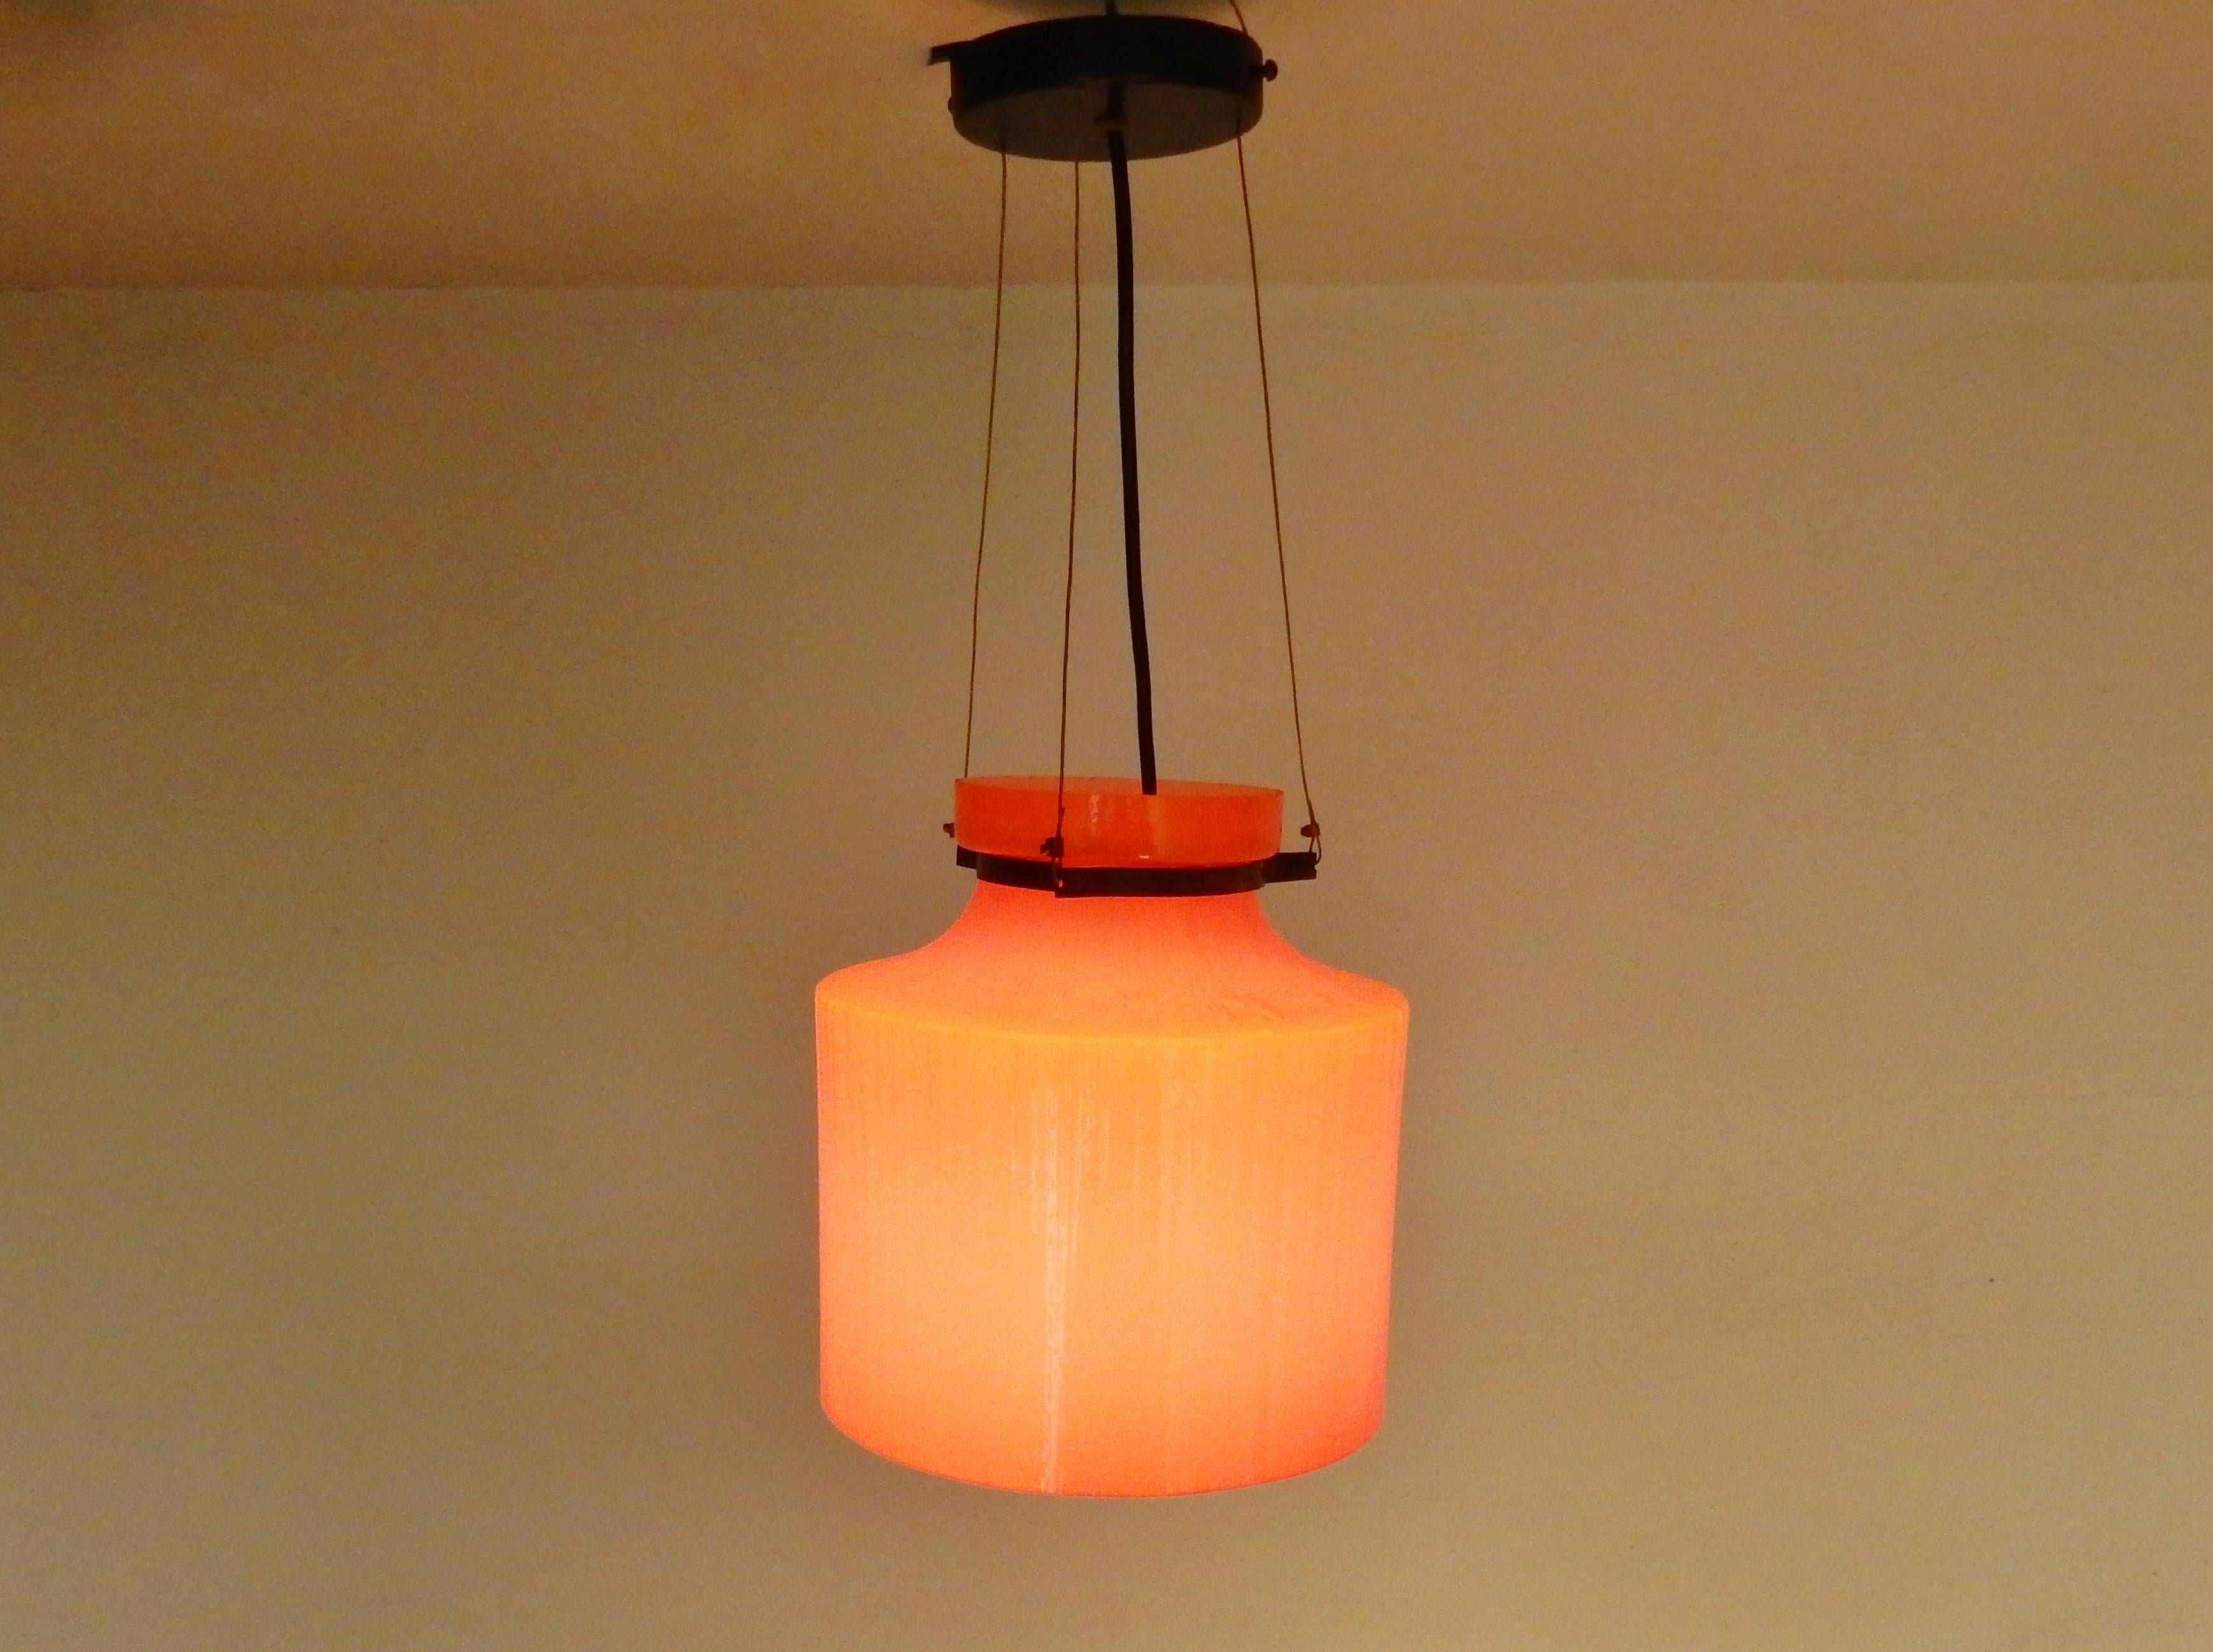 Ripple Structure Glass Pendant Light from Indoor, Netherlands, Early 1970s For Sale 1